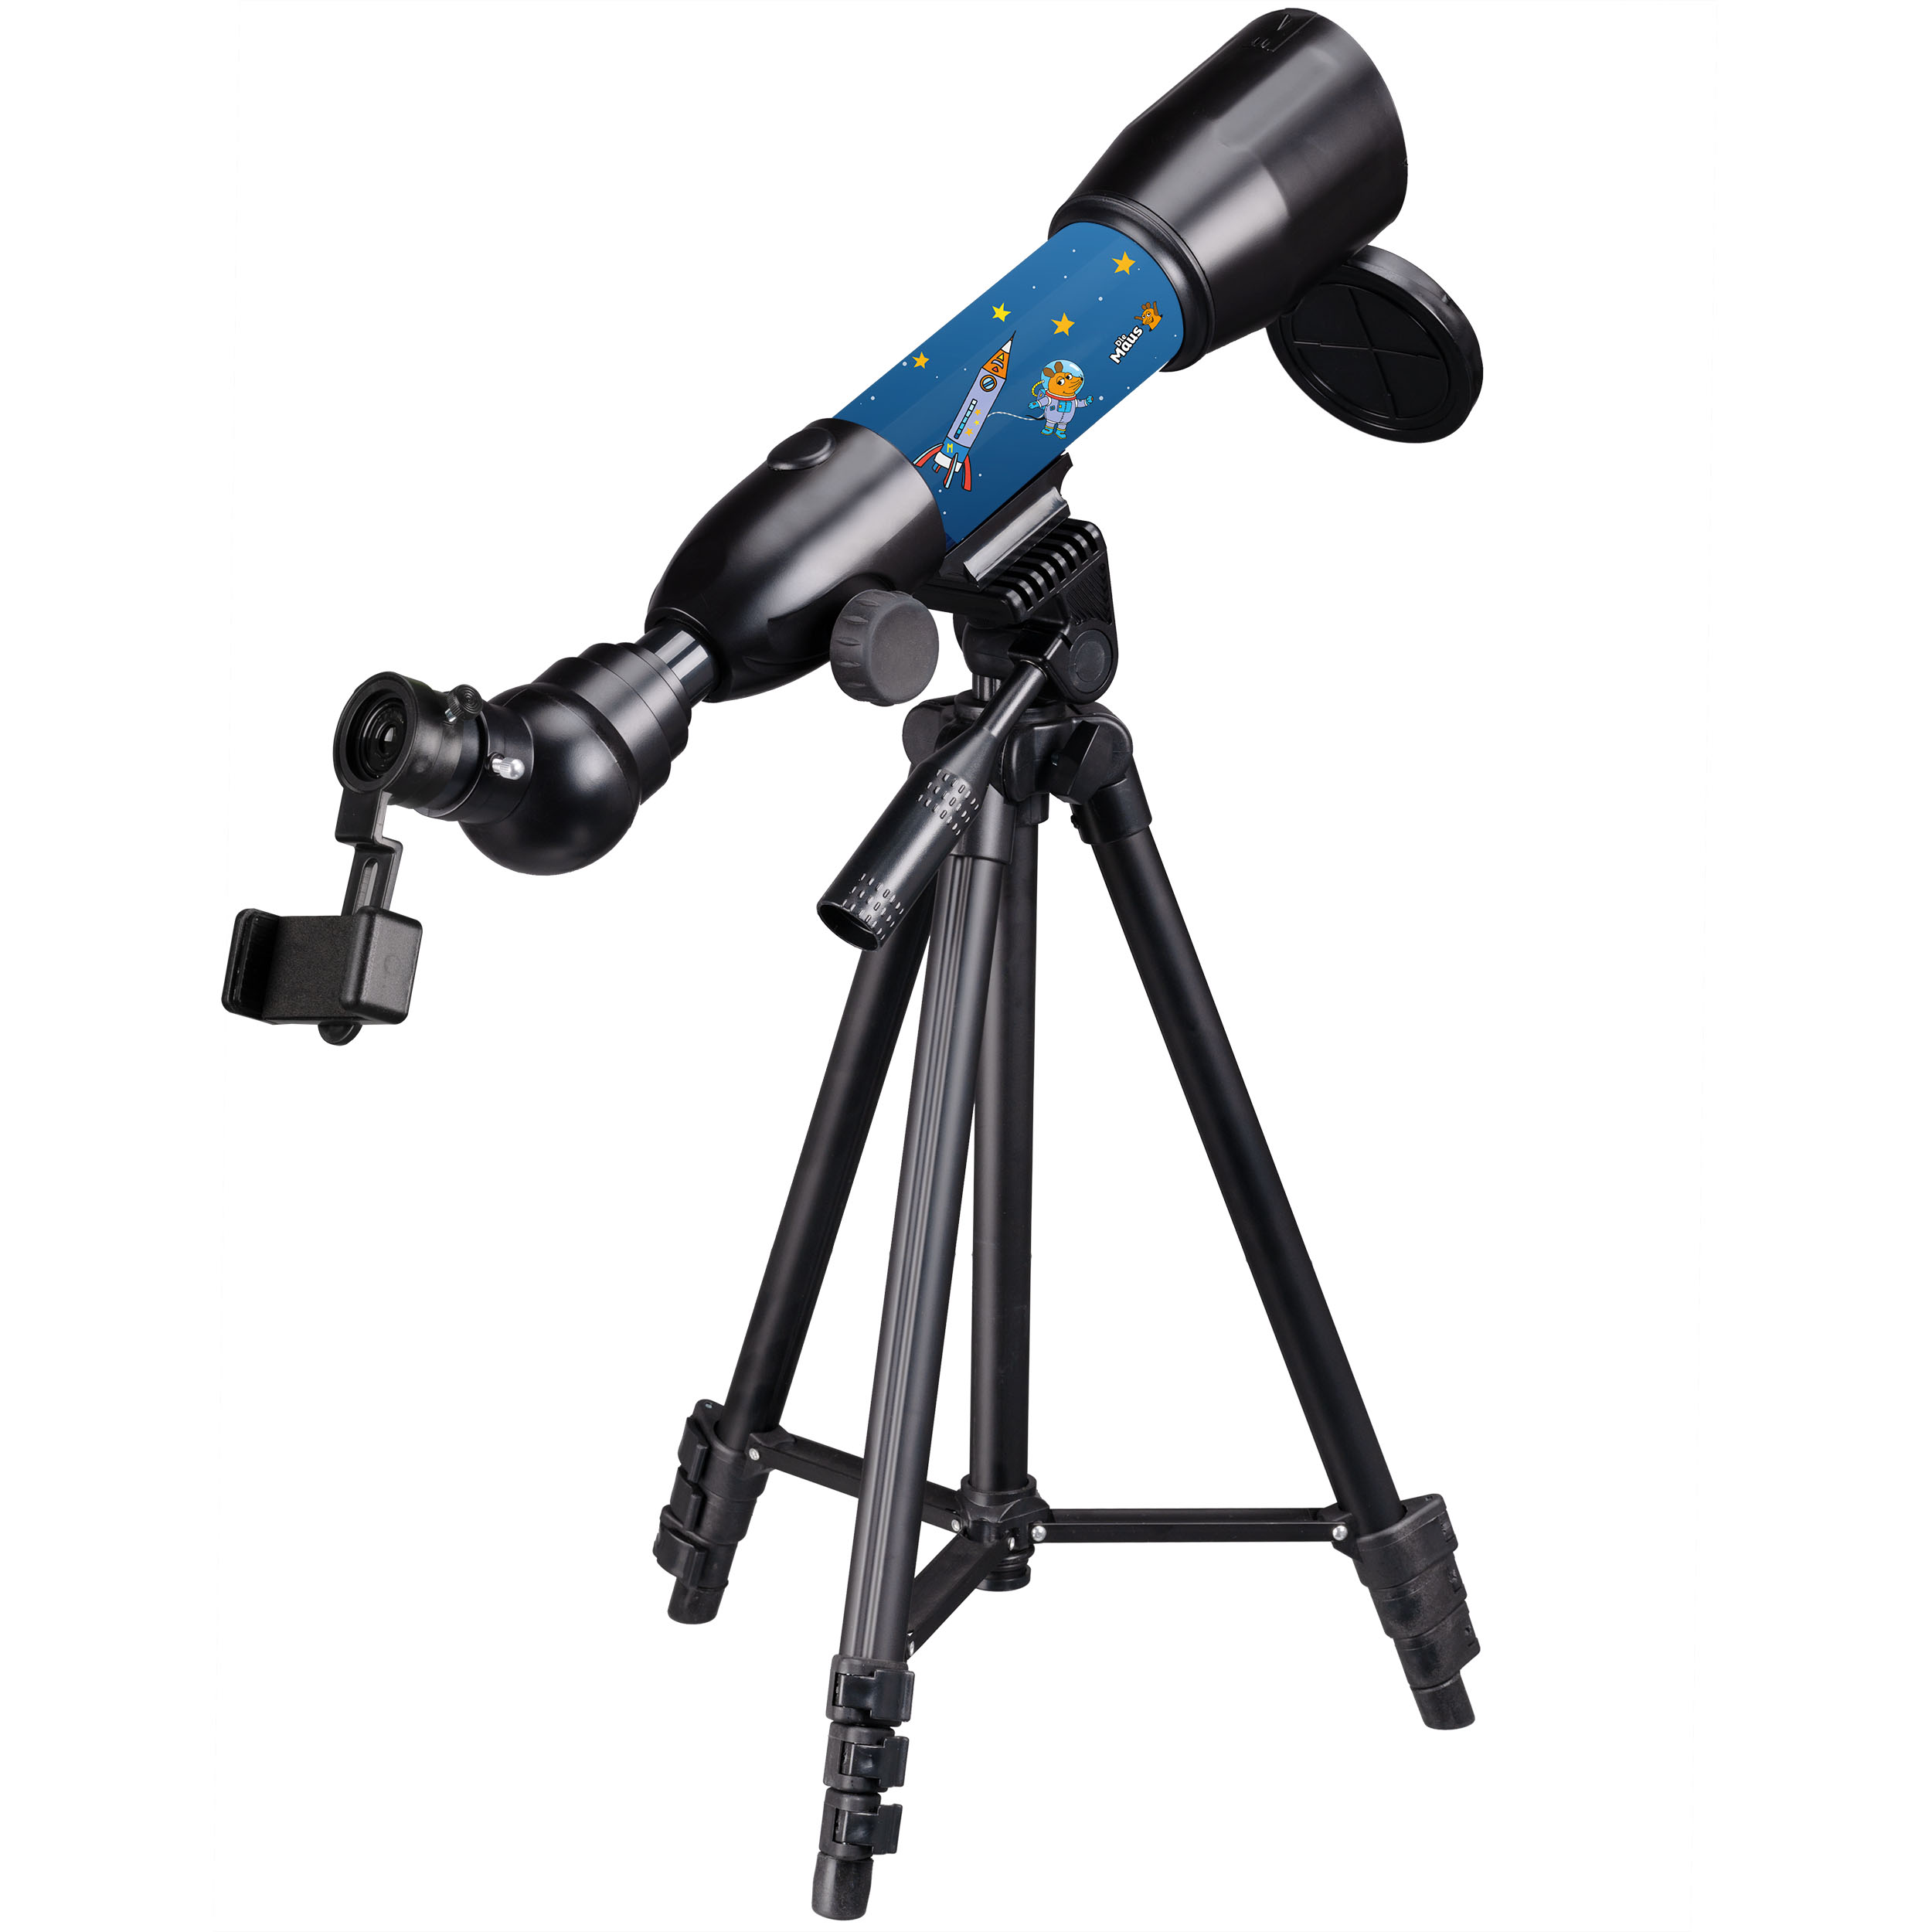 Die Maus Refractor Telescope 50/350 with Backpack